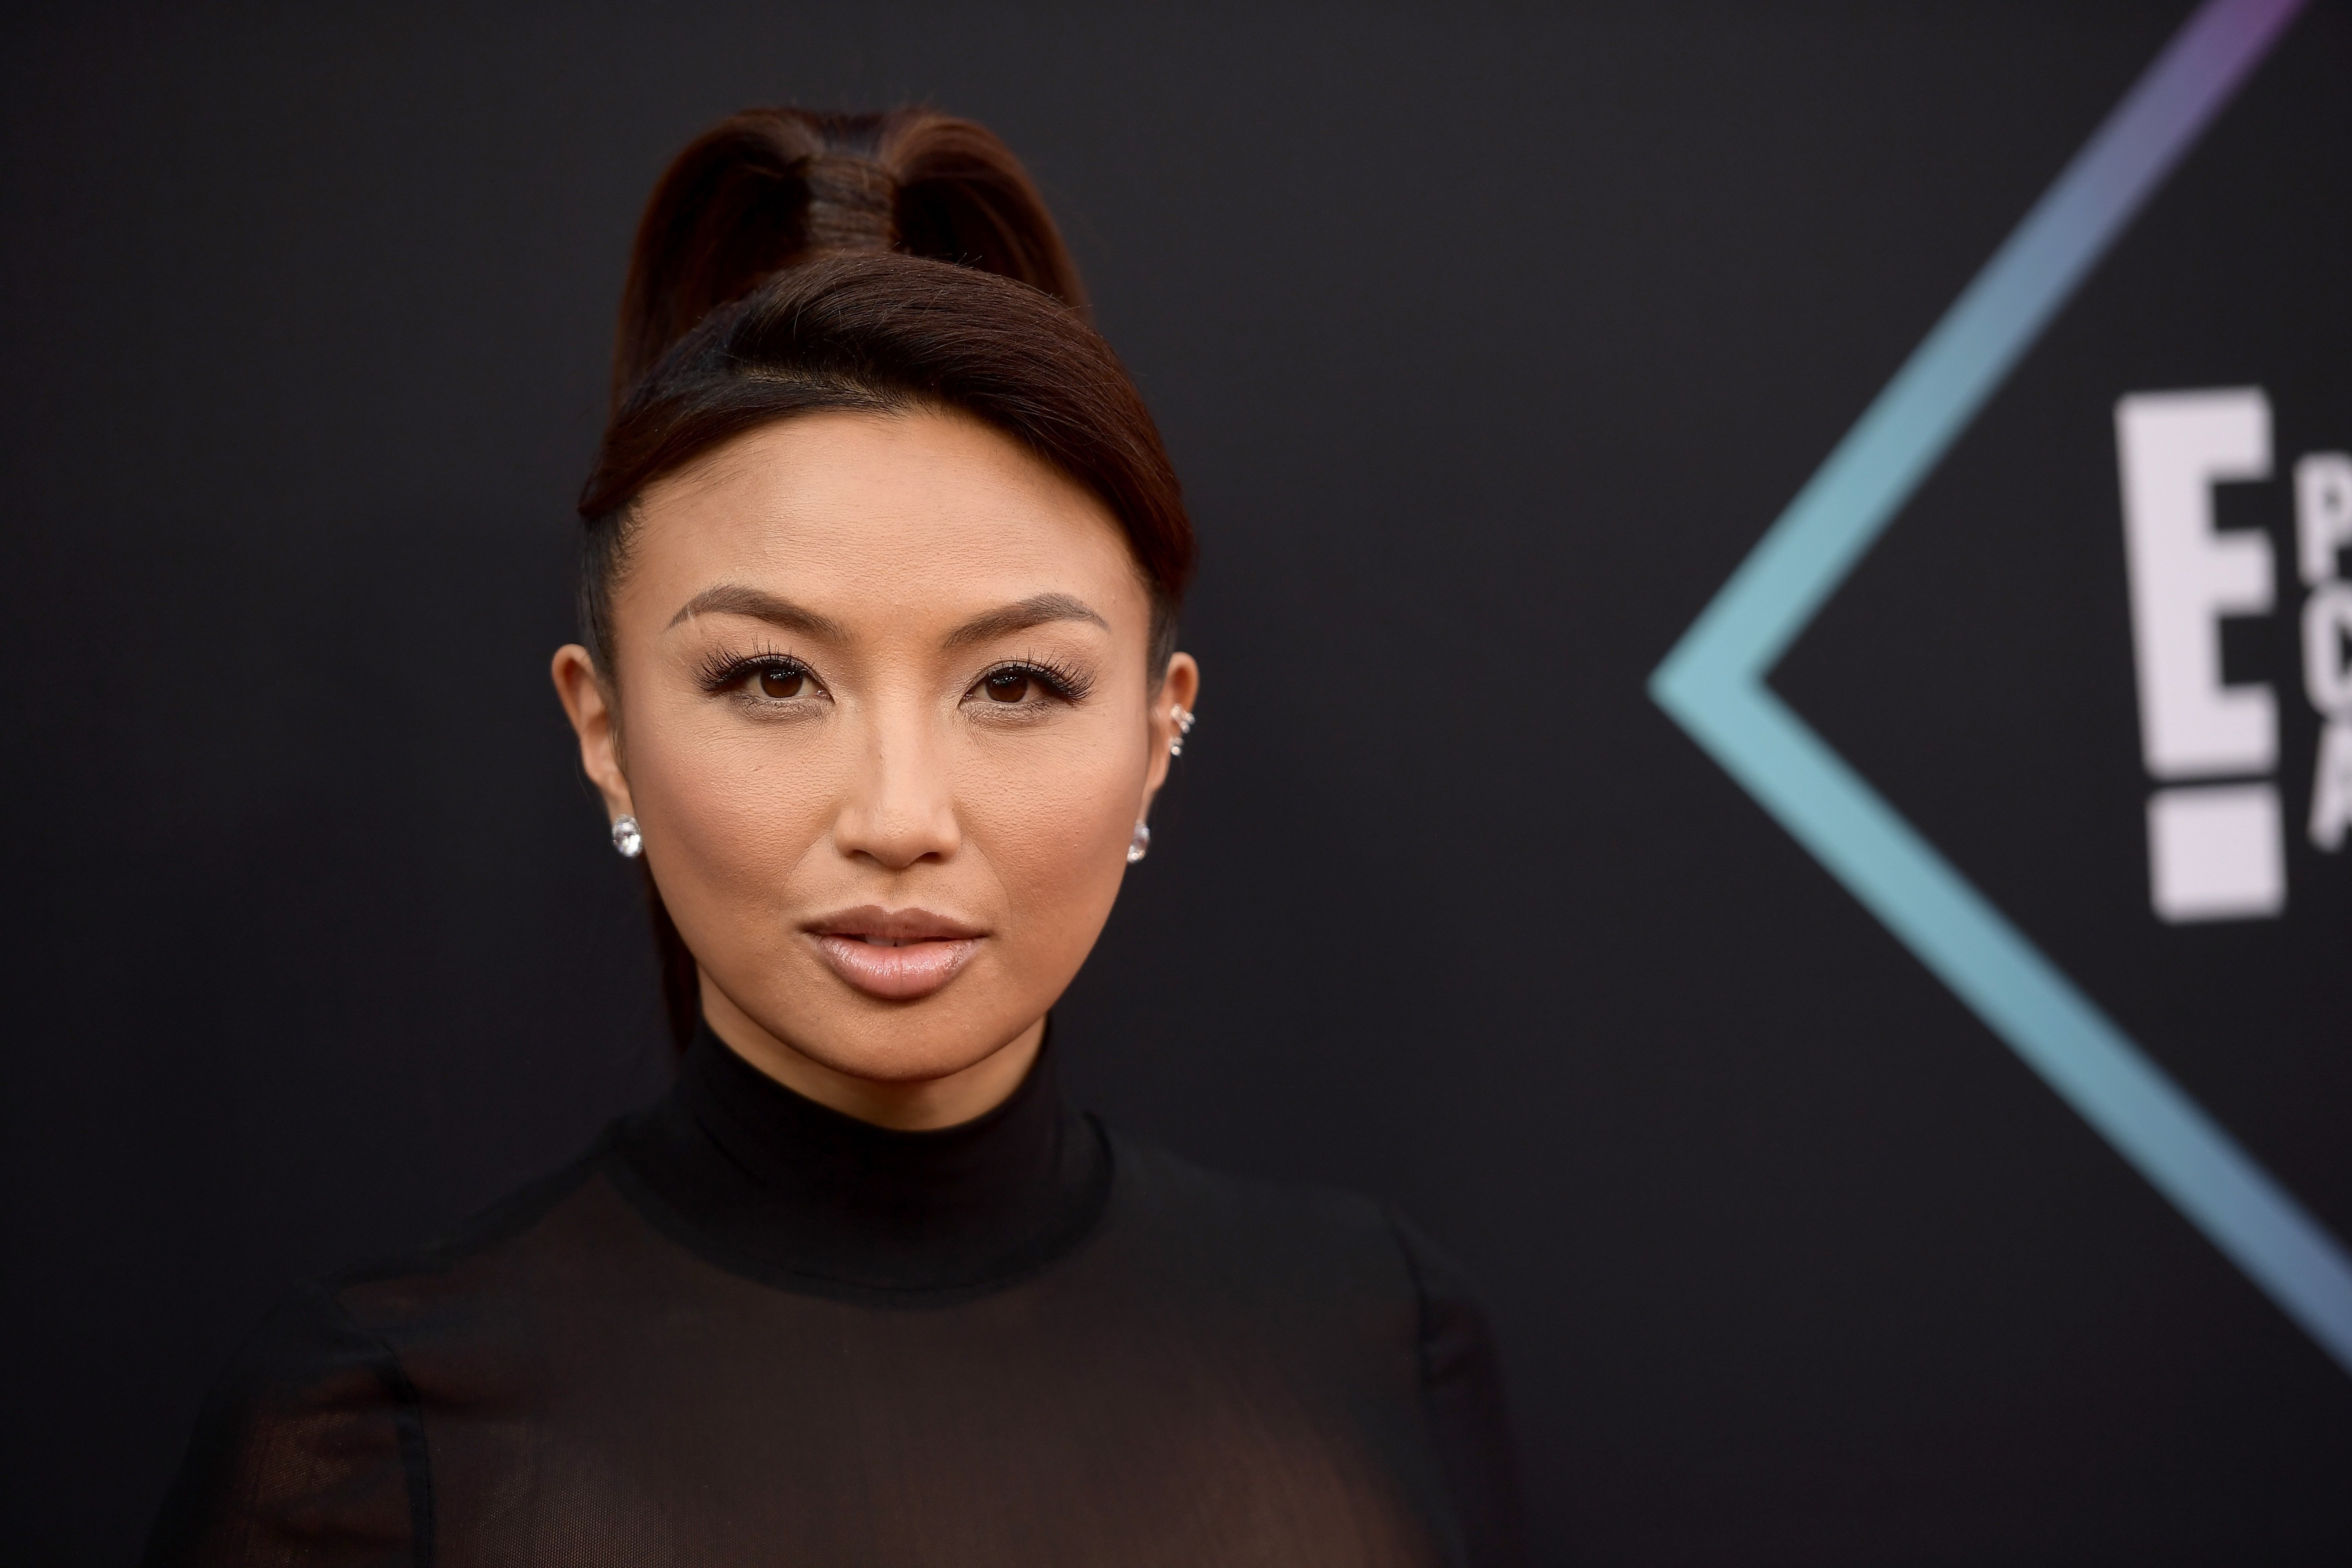 Jeannie Mai at the People's Choice Awards in November 2018 | Photo: Getty Images